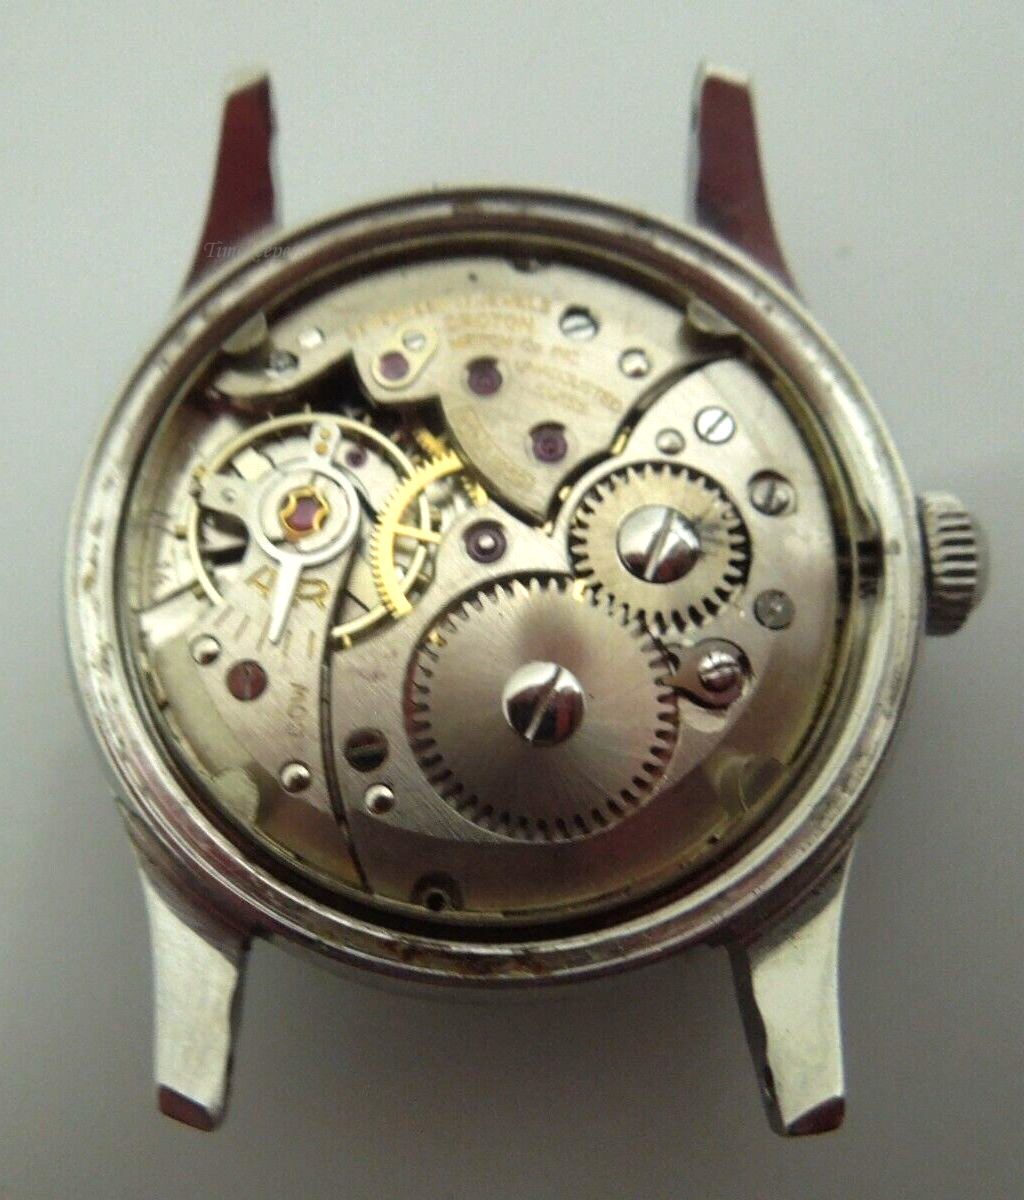 s241 Vintage Croton  Watch Co. 17 Jewels Swiss Movement 8943 Watch parts